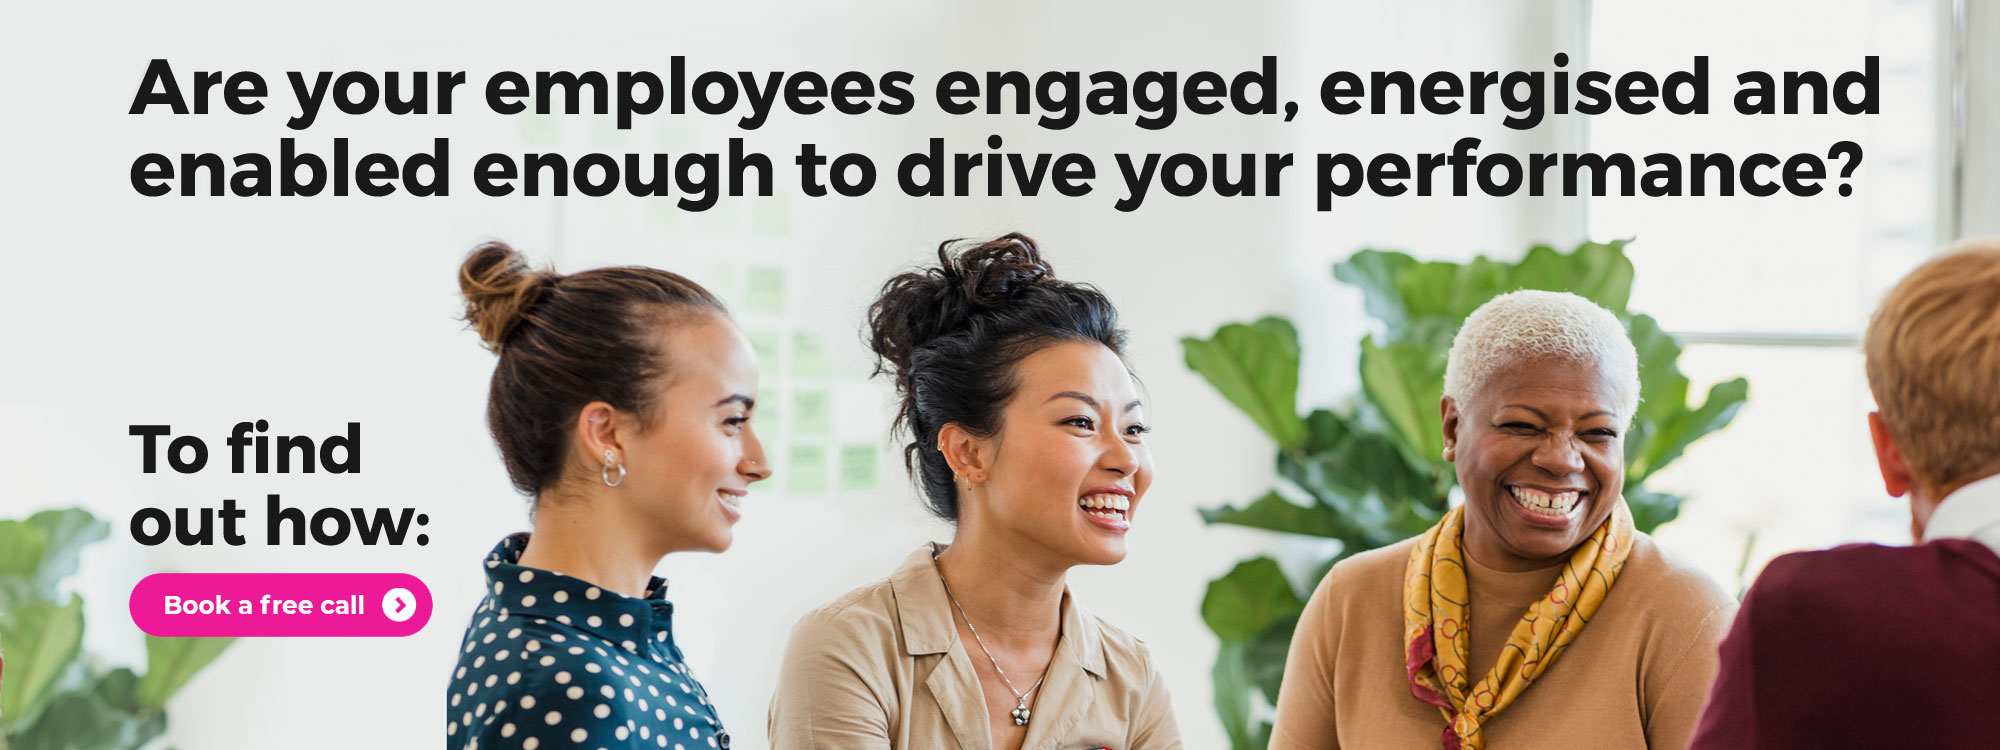 Are your employees engaged, energised and enabled enough to drive your performance? To find out how: Book a free call